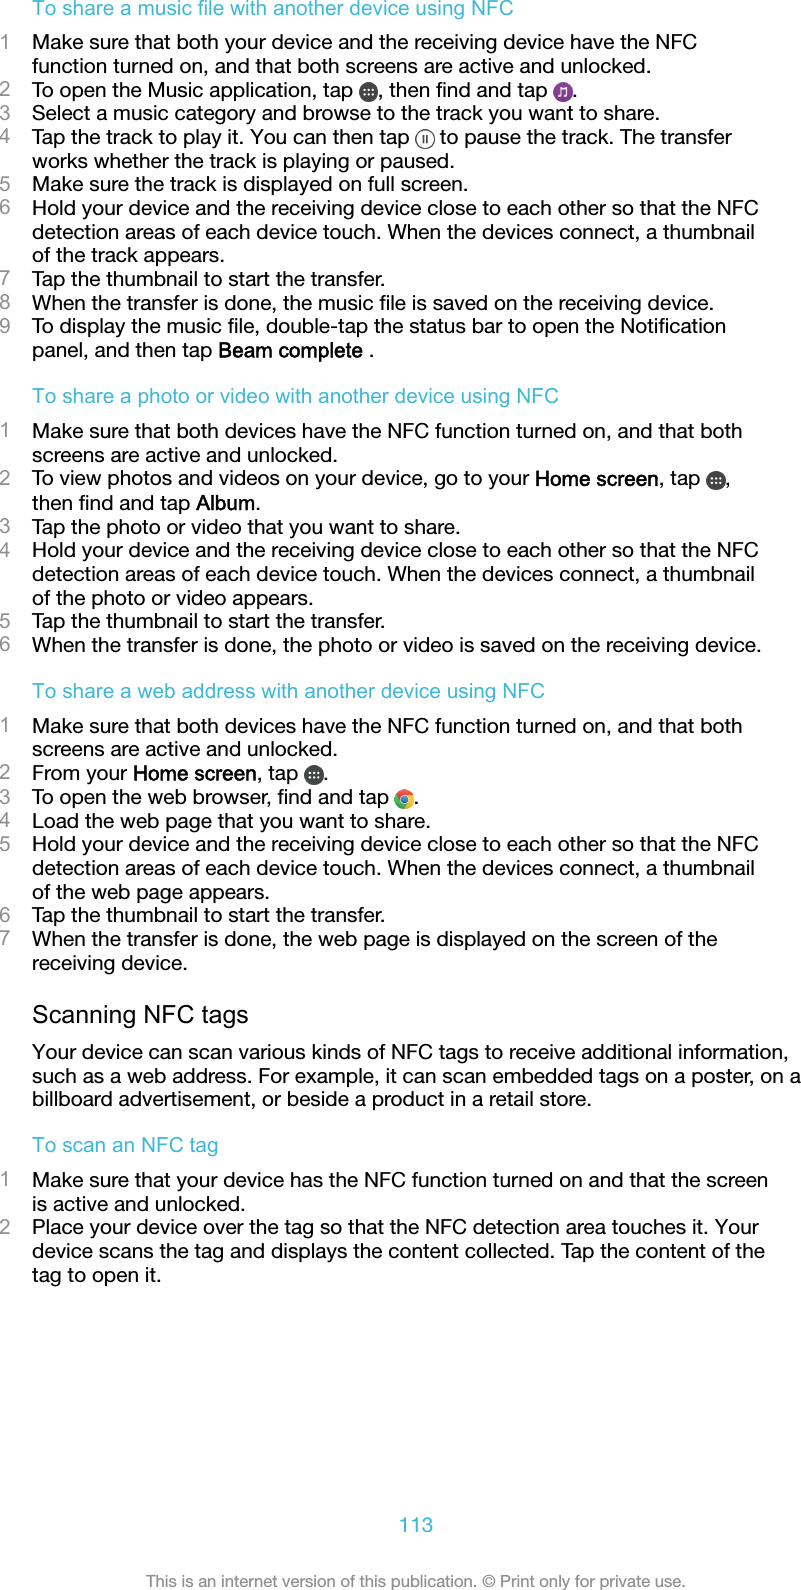 To share a music file with another device using NFC1Make sure that both your device and the receiving device have the NFCfunction turned on, and that both screens are active and unlocked.2To open the Music application, tap  , then ﬁnd and tap  .3Select a music category and browse to the track you want to share.4Tap the track to play it. You can then tap   to pause the track. The transferworks whether the track is playing or paused.5Make sure the track is displayed on full screen.6Hold your device and the receiving device close to each other so that the NFCdetection areas of each device touch. When the devices connect, a thumbnailof the track appears.7Tap the thumbnail to start the transfer.8When the transfer is done, the music ﬁle is saved on the receiving device.9To display the music ﬁle, double-tap the status bar to open the Notiﬁcationpanel, and then tap Beam complete .To share a photo or video with another device using NFC1Make sure that both devices have the NFC function turned on, and that bothscreens are active and unlocked.2To view photos and videos on your device, go to your Home screen, tap  ,then ﬁnd and tap Album.3Tap the photo or video that you want to share.4Hold your device and the receiving device close to each other so that the NFCdetection areas of each device touch. When the devices connect, a thumbnailof the photo or video appears.5Tap the thumbnail to start the transfer.6When the transfer is done, the photo or video is saved on the receiving device.To share a web address with another device using NFC1Make sure that both devices have the NFC function turned on, and that bothscreens are active and unlocked.2From your Home screen, tap  .3To open the web browser, ﬁnd and tap  .4Load the web page that you want to share.5Hold your device and the receiving device close to each other so that the NFCdetection areas of each device touch. When the devices connect, a thumbnailof the web page appears.6Tap the thumbnail to start the transfer.7When the transfer is done, the web page is displayed on the screen of thereceiving device.Scanning NFC tagsYour device can scan various kinds of NFC tags to receive additional information,such as a web address. For example, it can scan embedded tags on a poster, on abillboard advertisement, or beside a product in a retail store.To scan an NFC tag1Make sure that your device has the NFC function turned on and that the screenis active and unlocked.2Place your device over the tag so that the NFC detection area touches it. Yourdevice scans the tag and displays the content collected. Tap the content of thetag to open it.113This is an internet version of this publication. © Print only for private use.